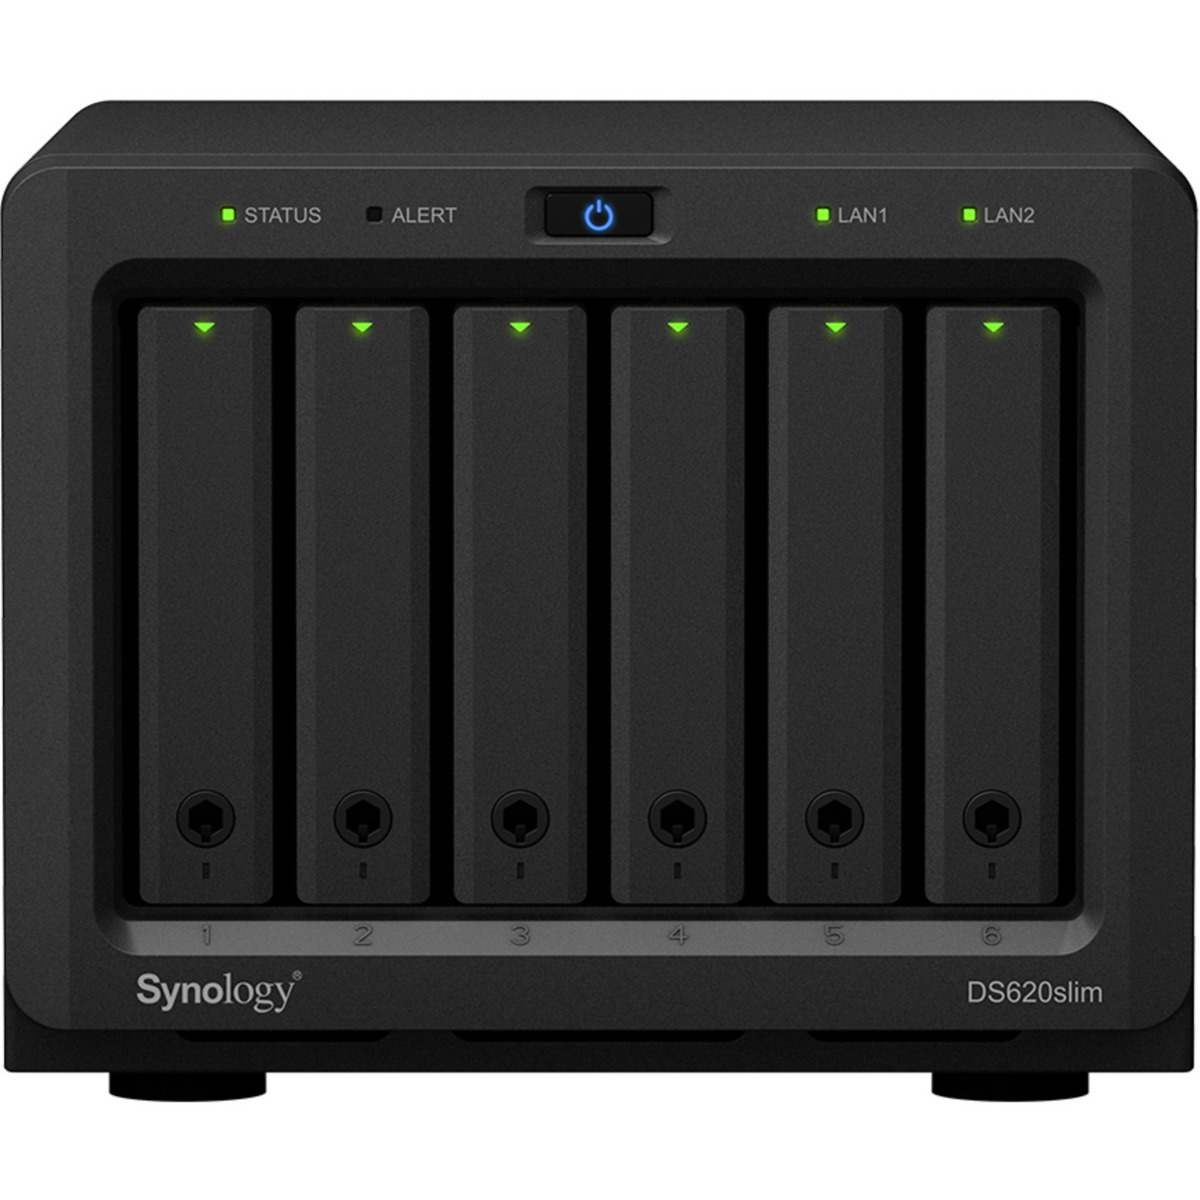 Synology DiskStation DS620slim 10tb 6-Bay Desktop Multimedia / Power User / Business NAS - Network Attached Storage Device 5x2tb Samsung 870 EVO MZ-77E2T0BAM 2.5 560/530MB/s SATA 6Gb/s SSD CONSUMER Class Drives Installed - Burn-In Tested - FREE RAM UPGRADE DiskStation DS620slim